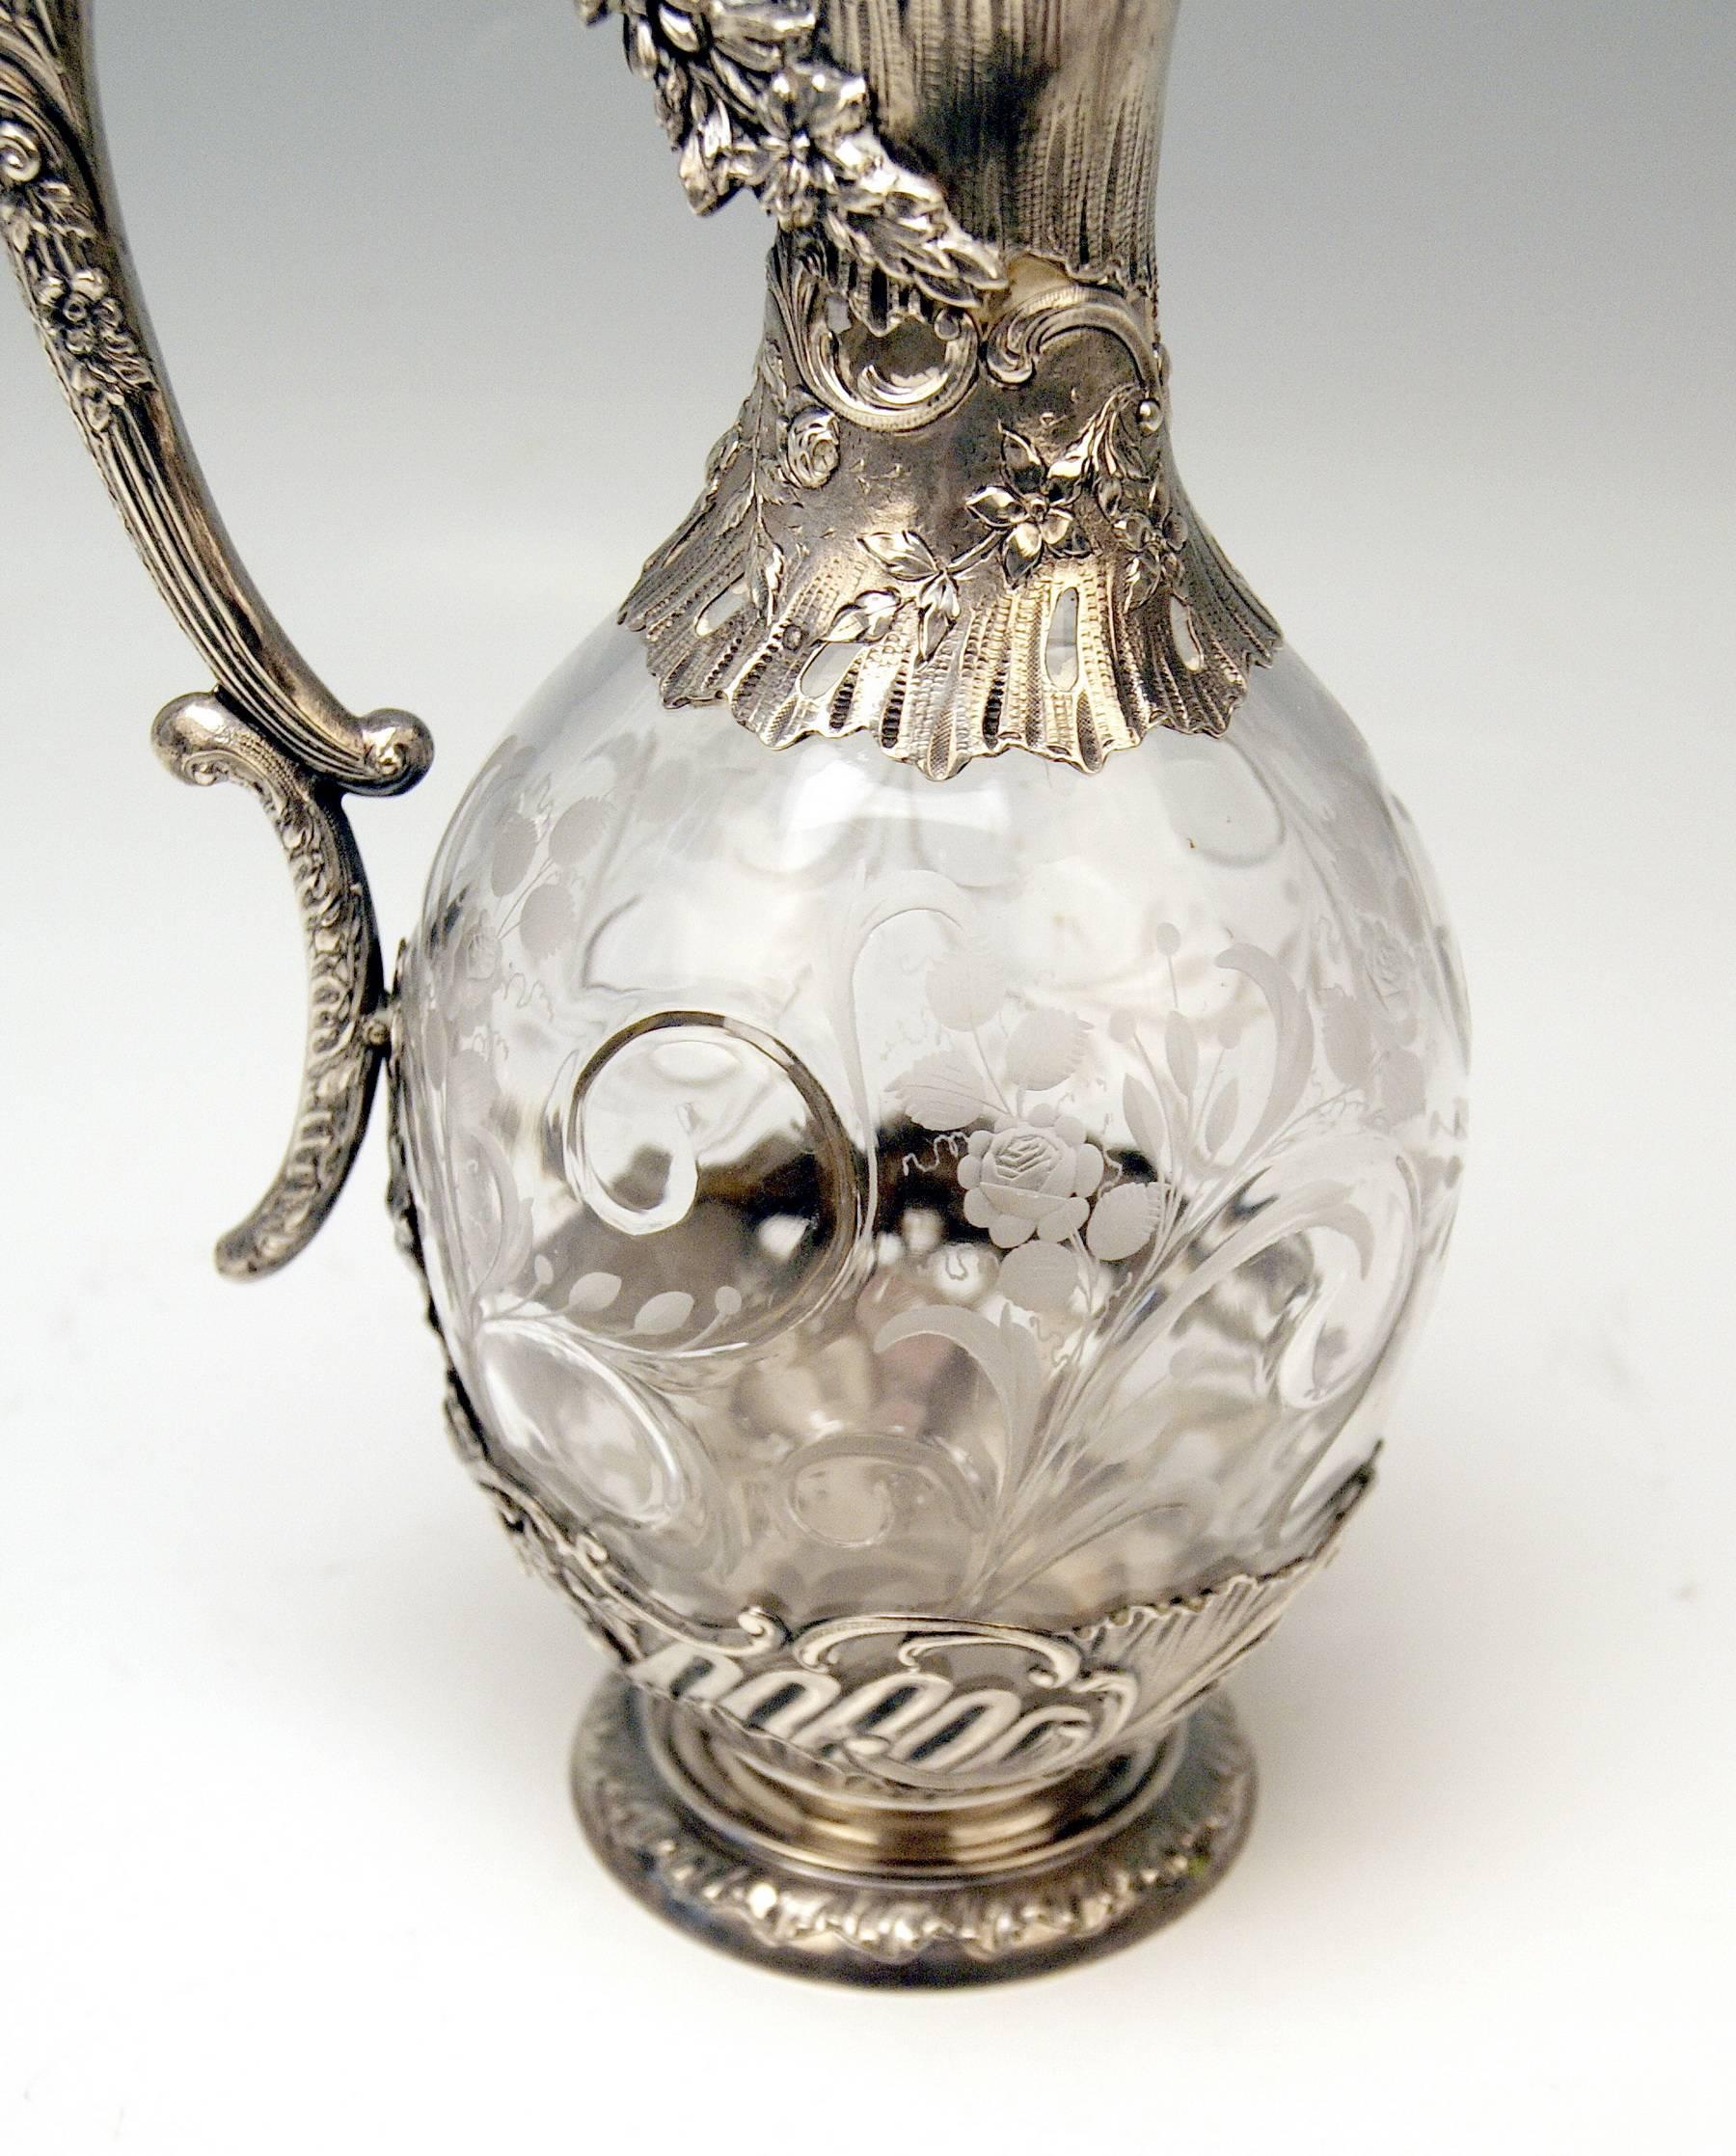 A pair of glass decanters (Carafes) with gorgeous silver mountings transition style from Historicism towards Art Nouveau period.

The decanters are made of glass, partially covered with gorgeous silver 800 mountings.

Hallmarked: 
Master's mark